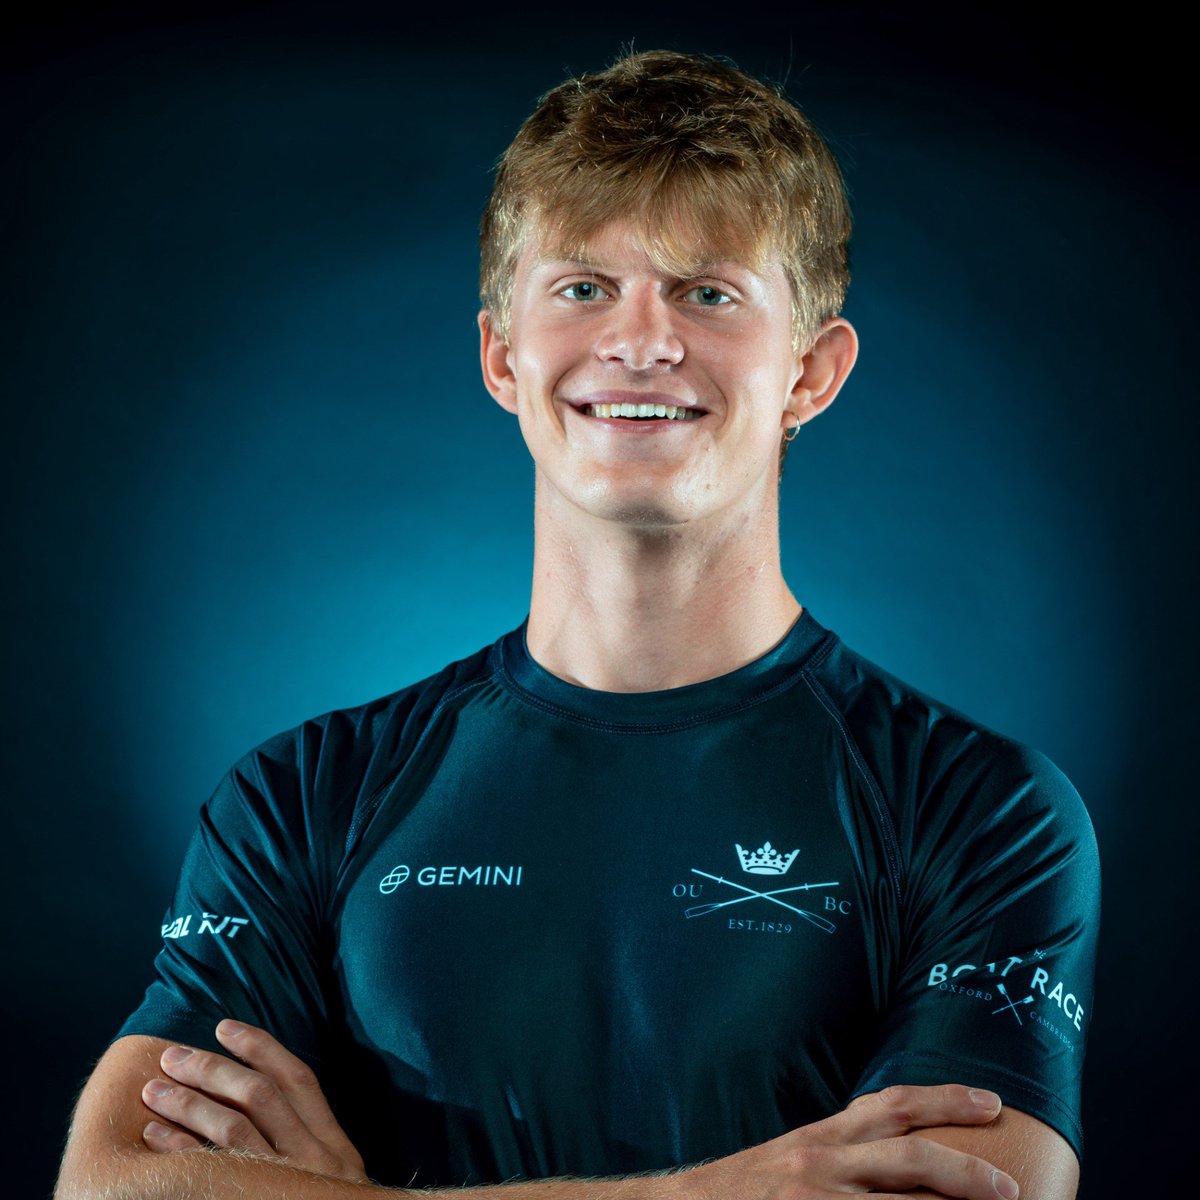 Many congratulations to @StJohnsOx undergraduate, Saxon Stacey: he has been selected to row bow @theboatrace in the @UniofOxford Men's Crew in this year's 169th Men's Race. The race is on Sat 30 March (on @BBC from 14.00 and on YouTube). We'll be cheering Saxon and the crew on!